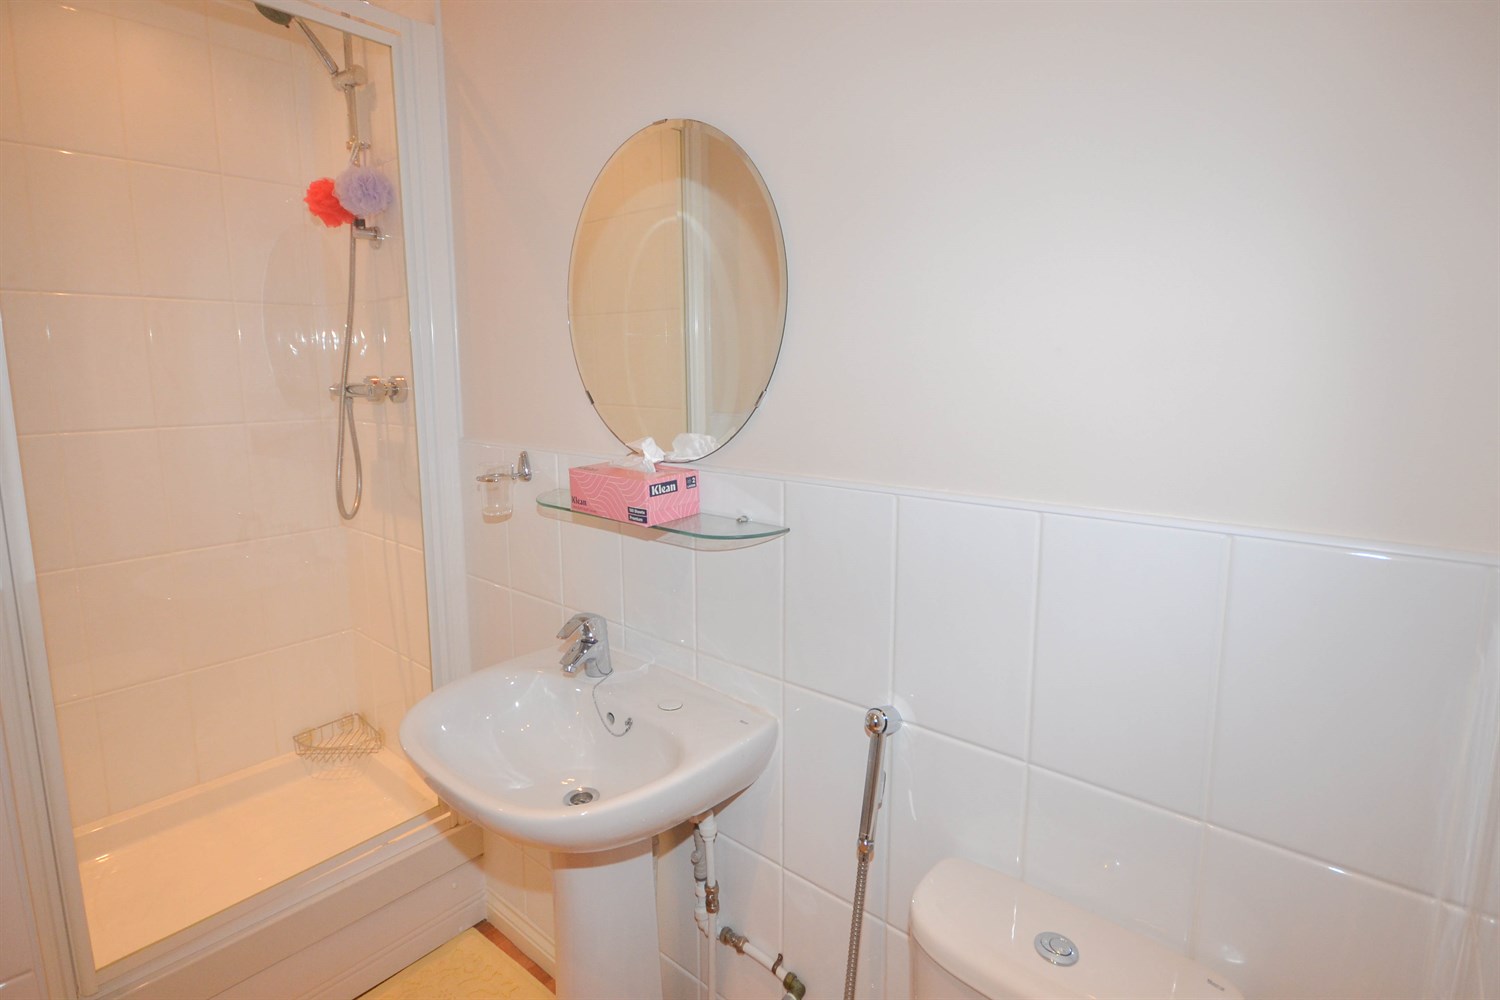 4 bed mid terraced town house for sale in Boldon, Tyne & Wear  - Property Image 7